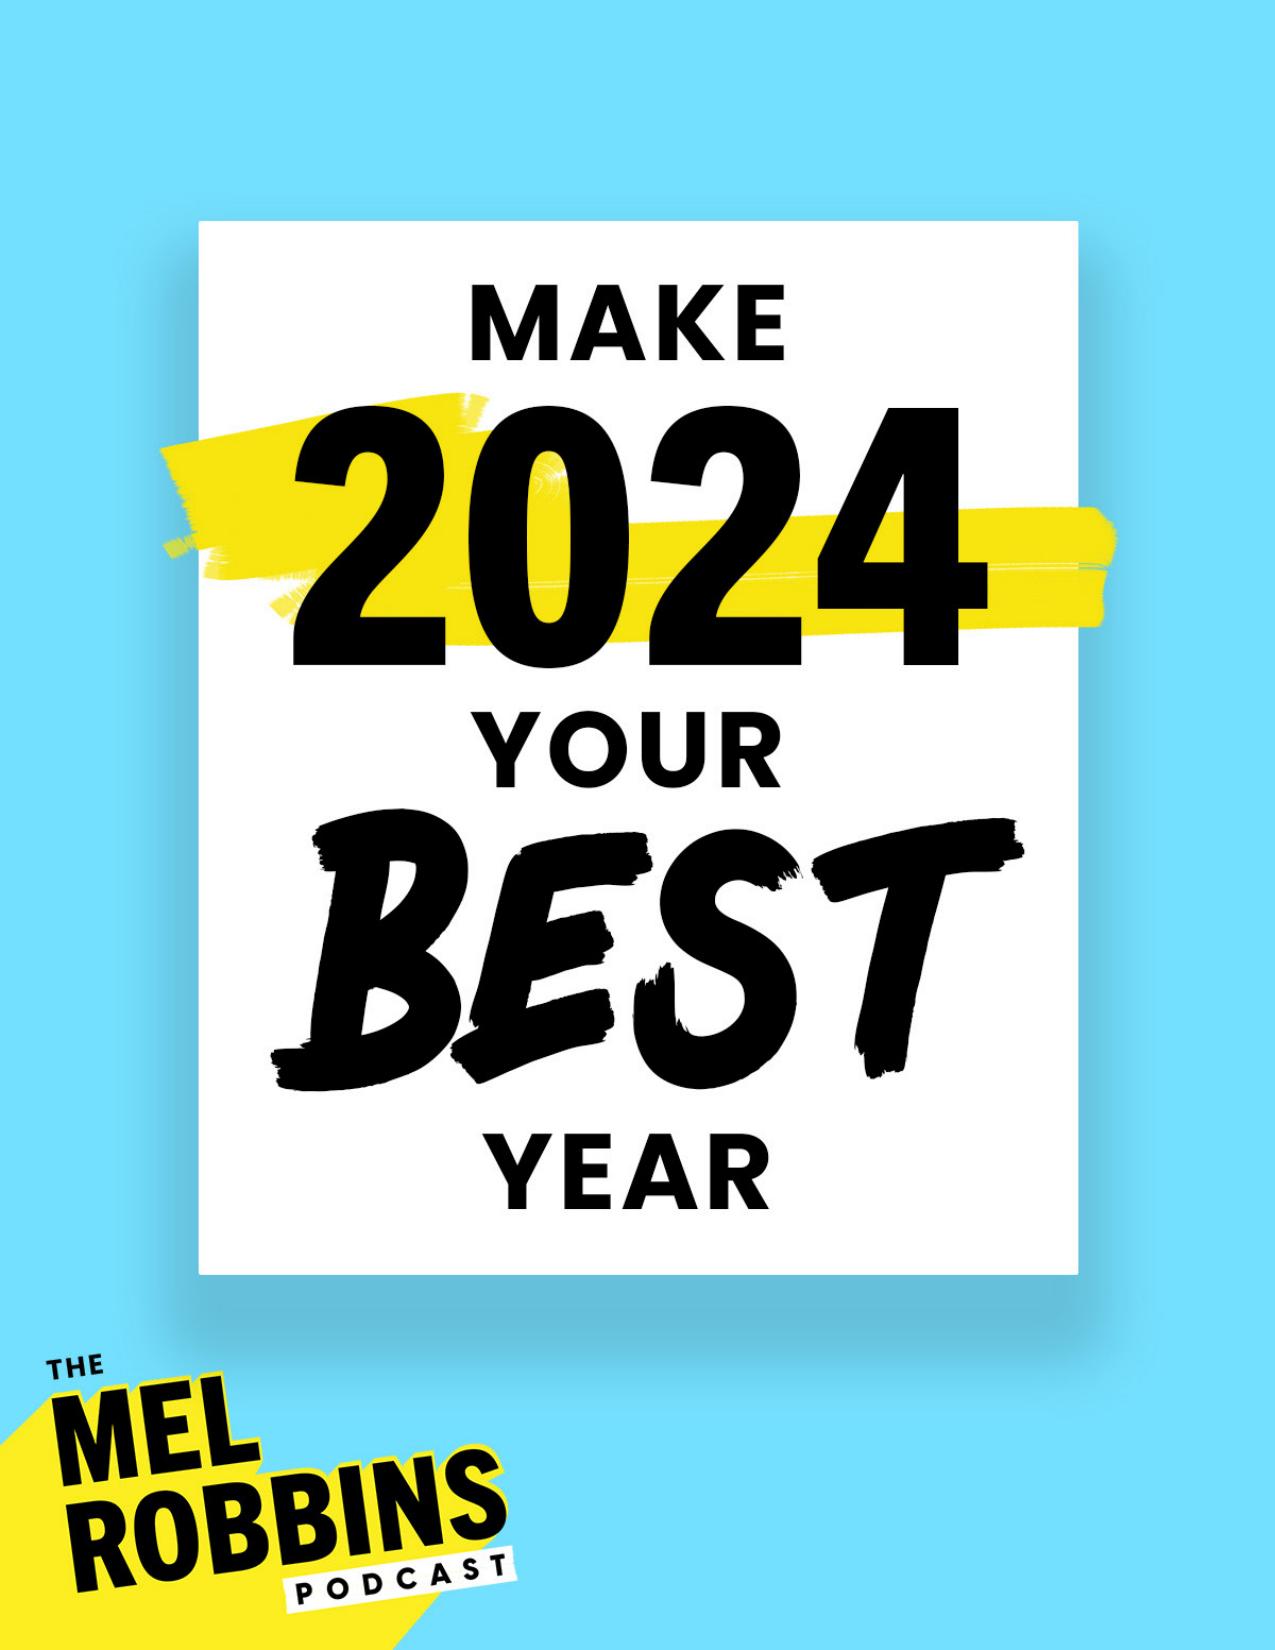 Make 2024 Your Best Year